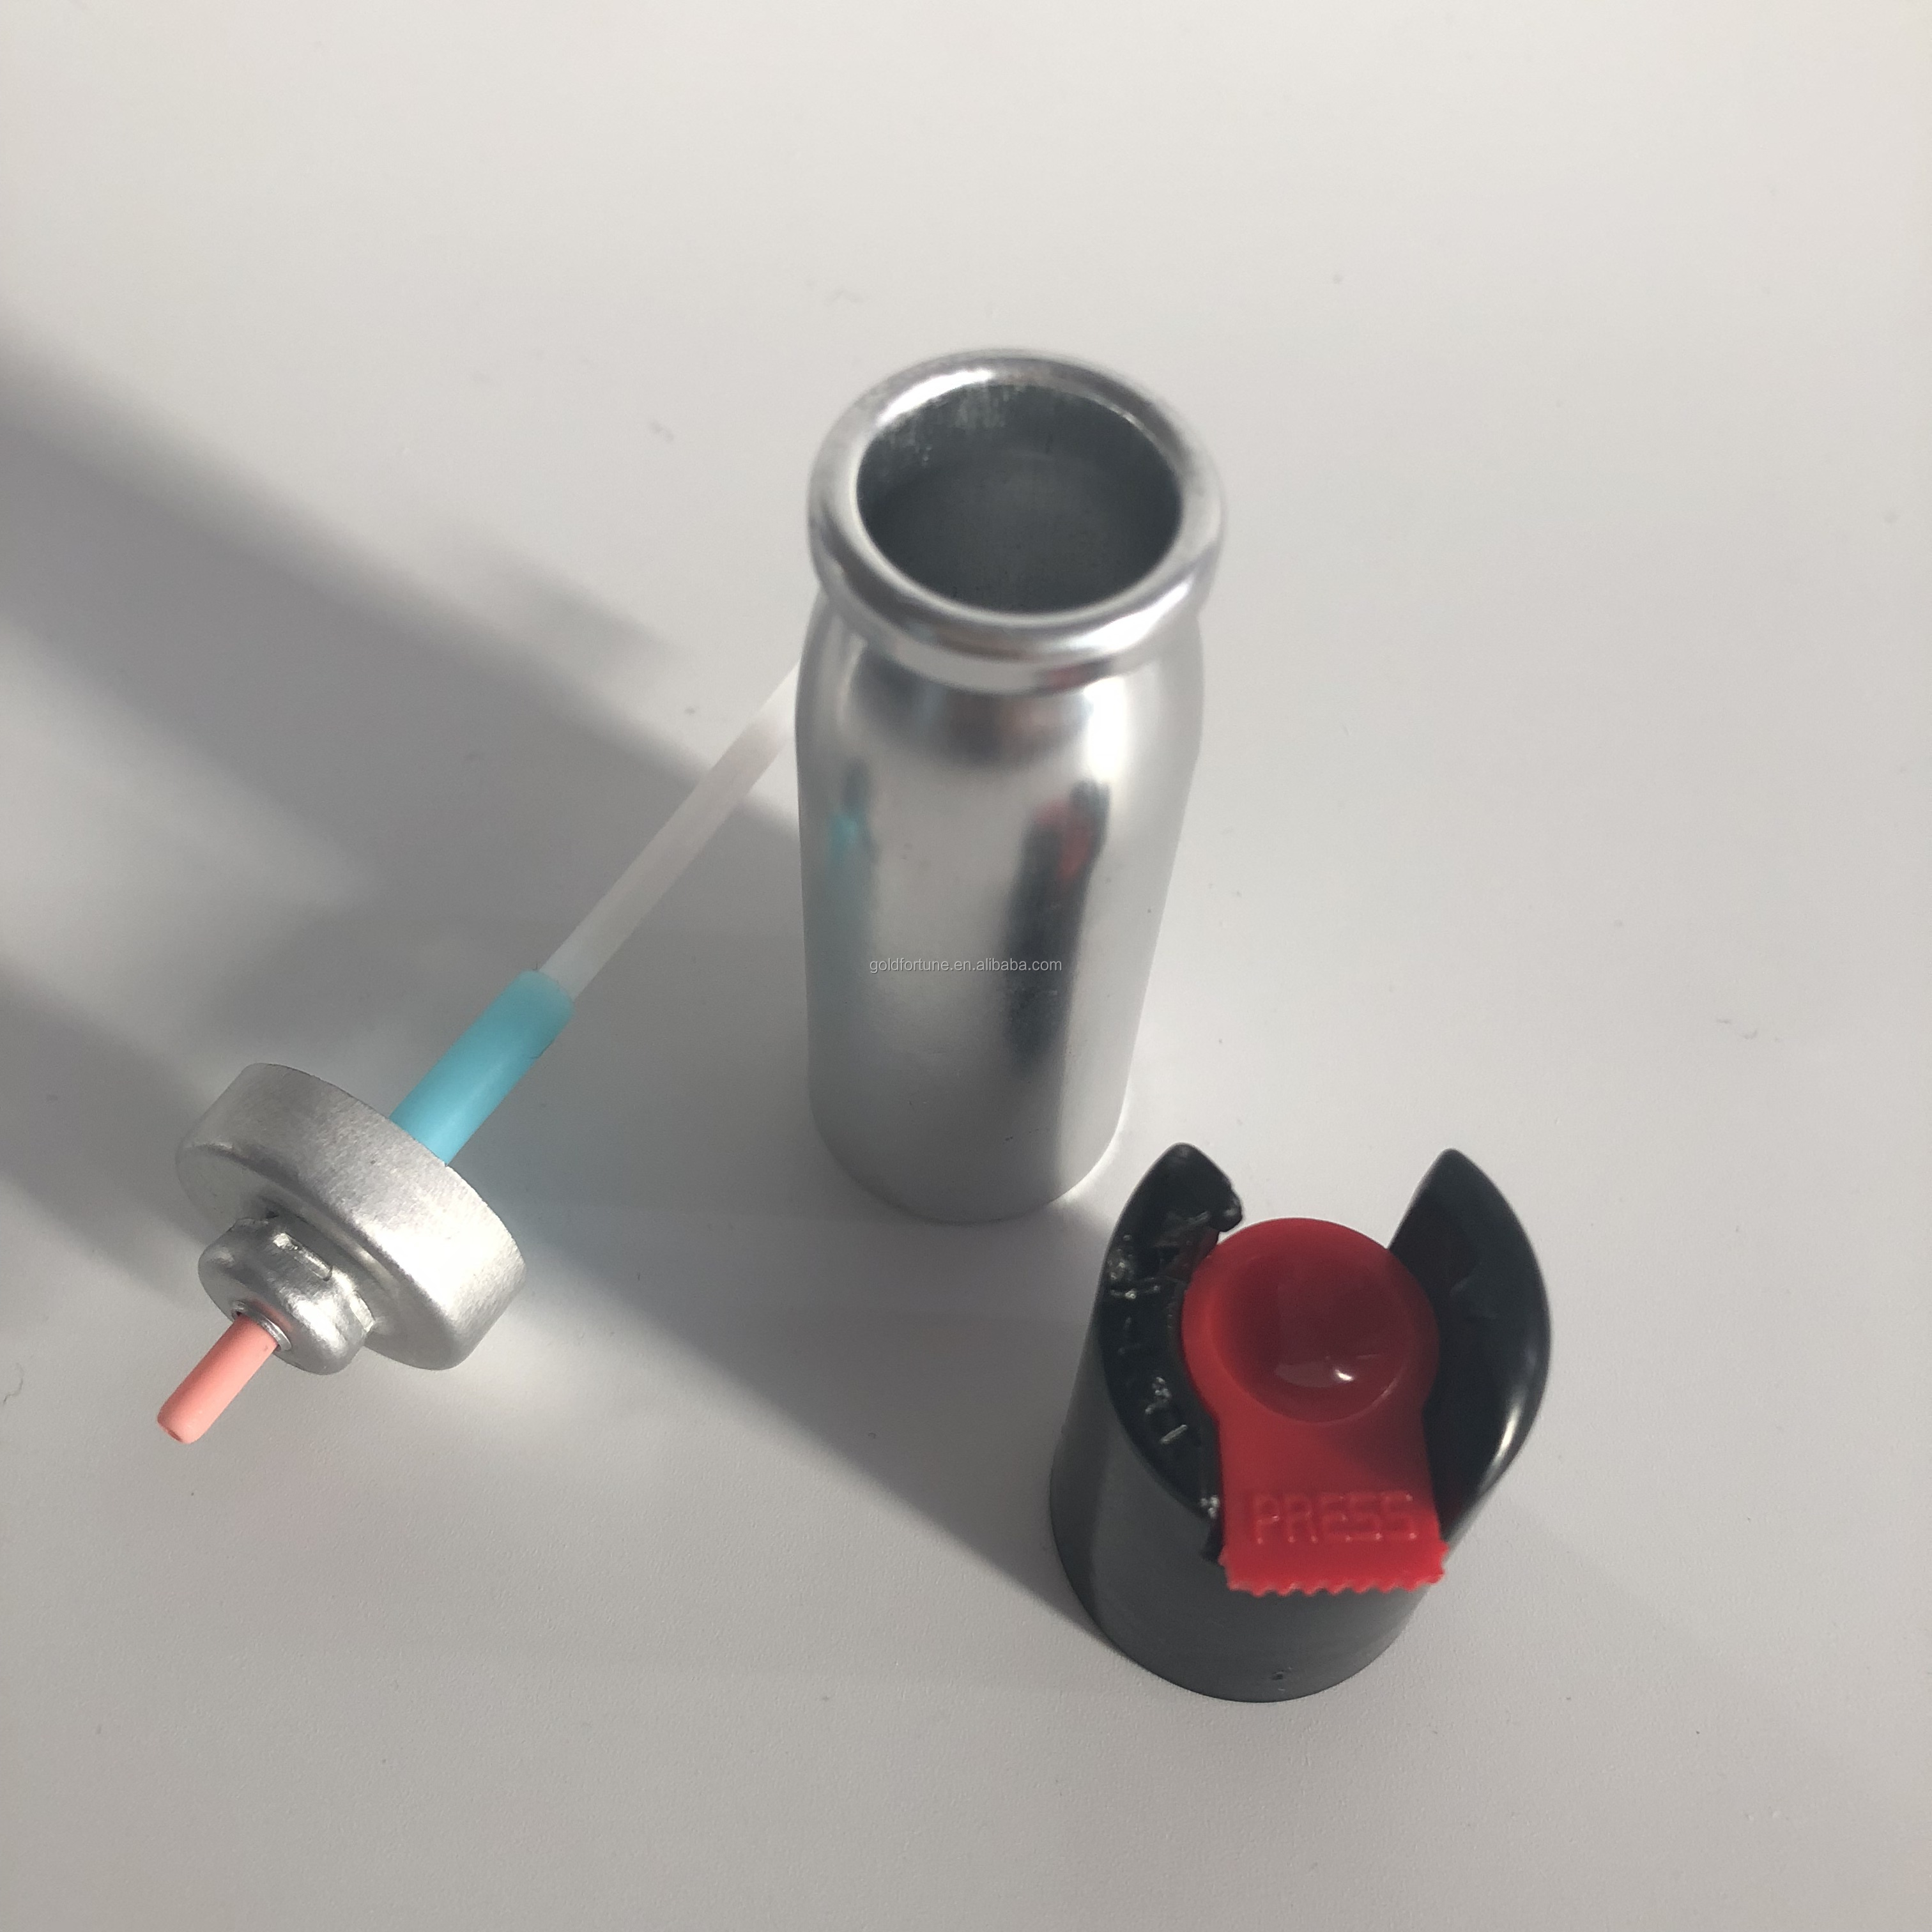 2021 Hot Sale Empty Aluminum Aerosol Can with Valve and Actuator for Pepper spray